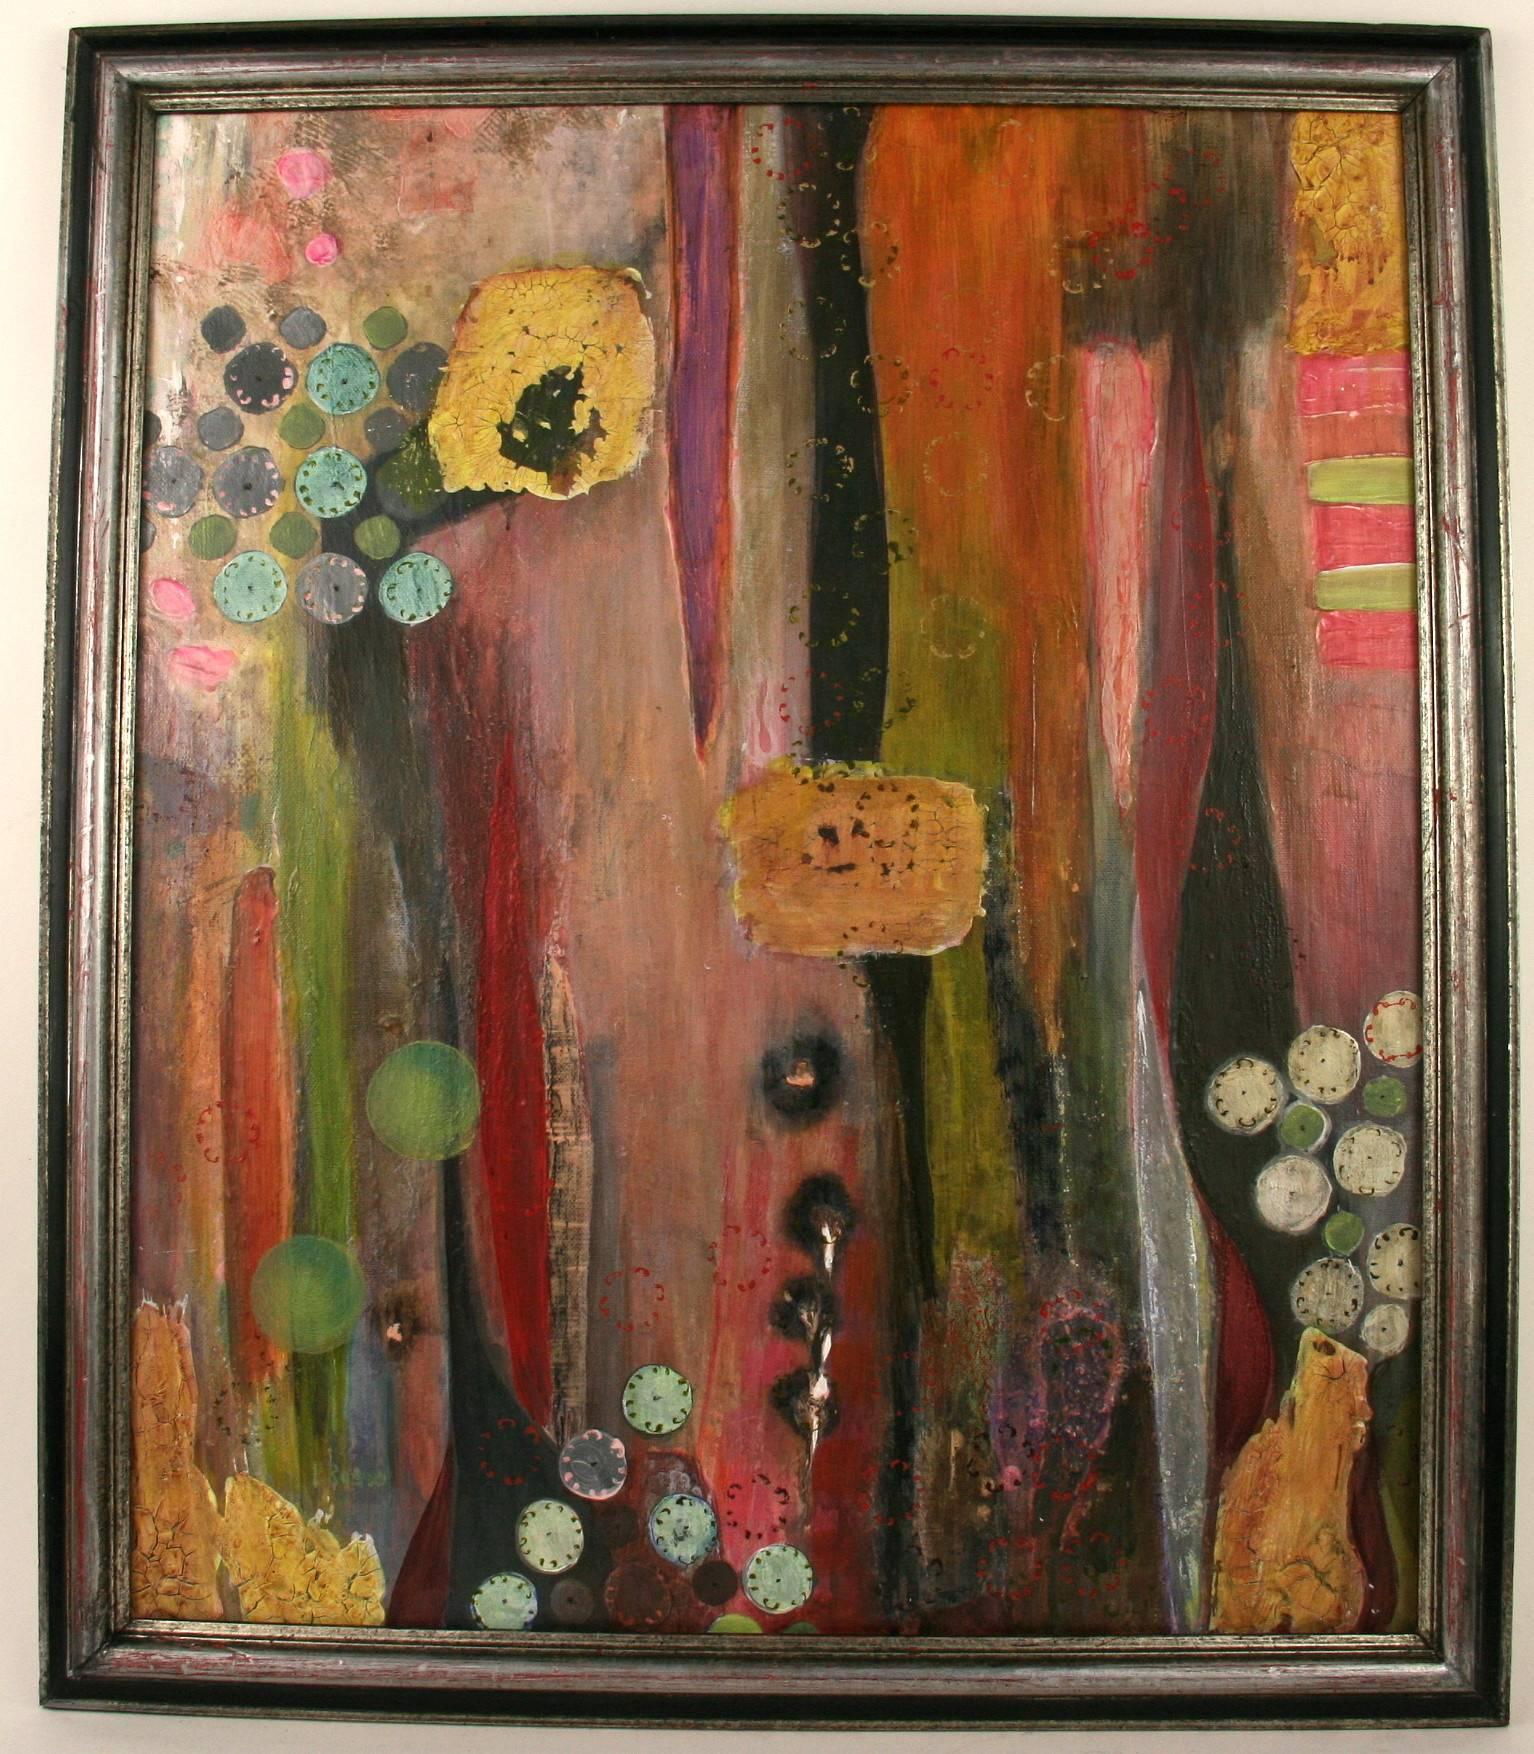 #5-2940 Lost in Time  abstract Mixed Media on canvas displayed in a silver-black wood frame.Signed lower left by P.Russo Neapolitan artist 1962